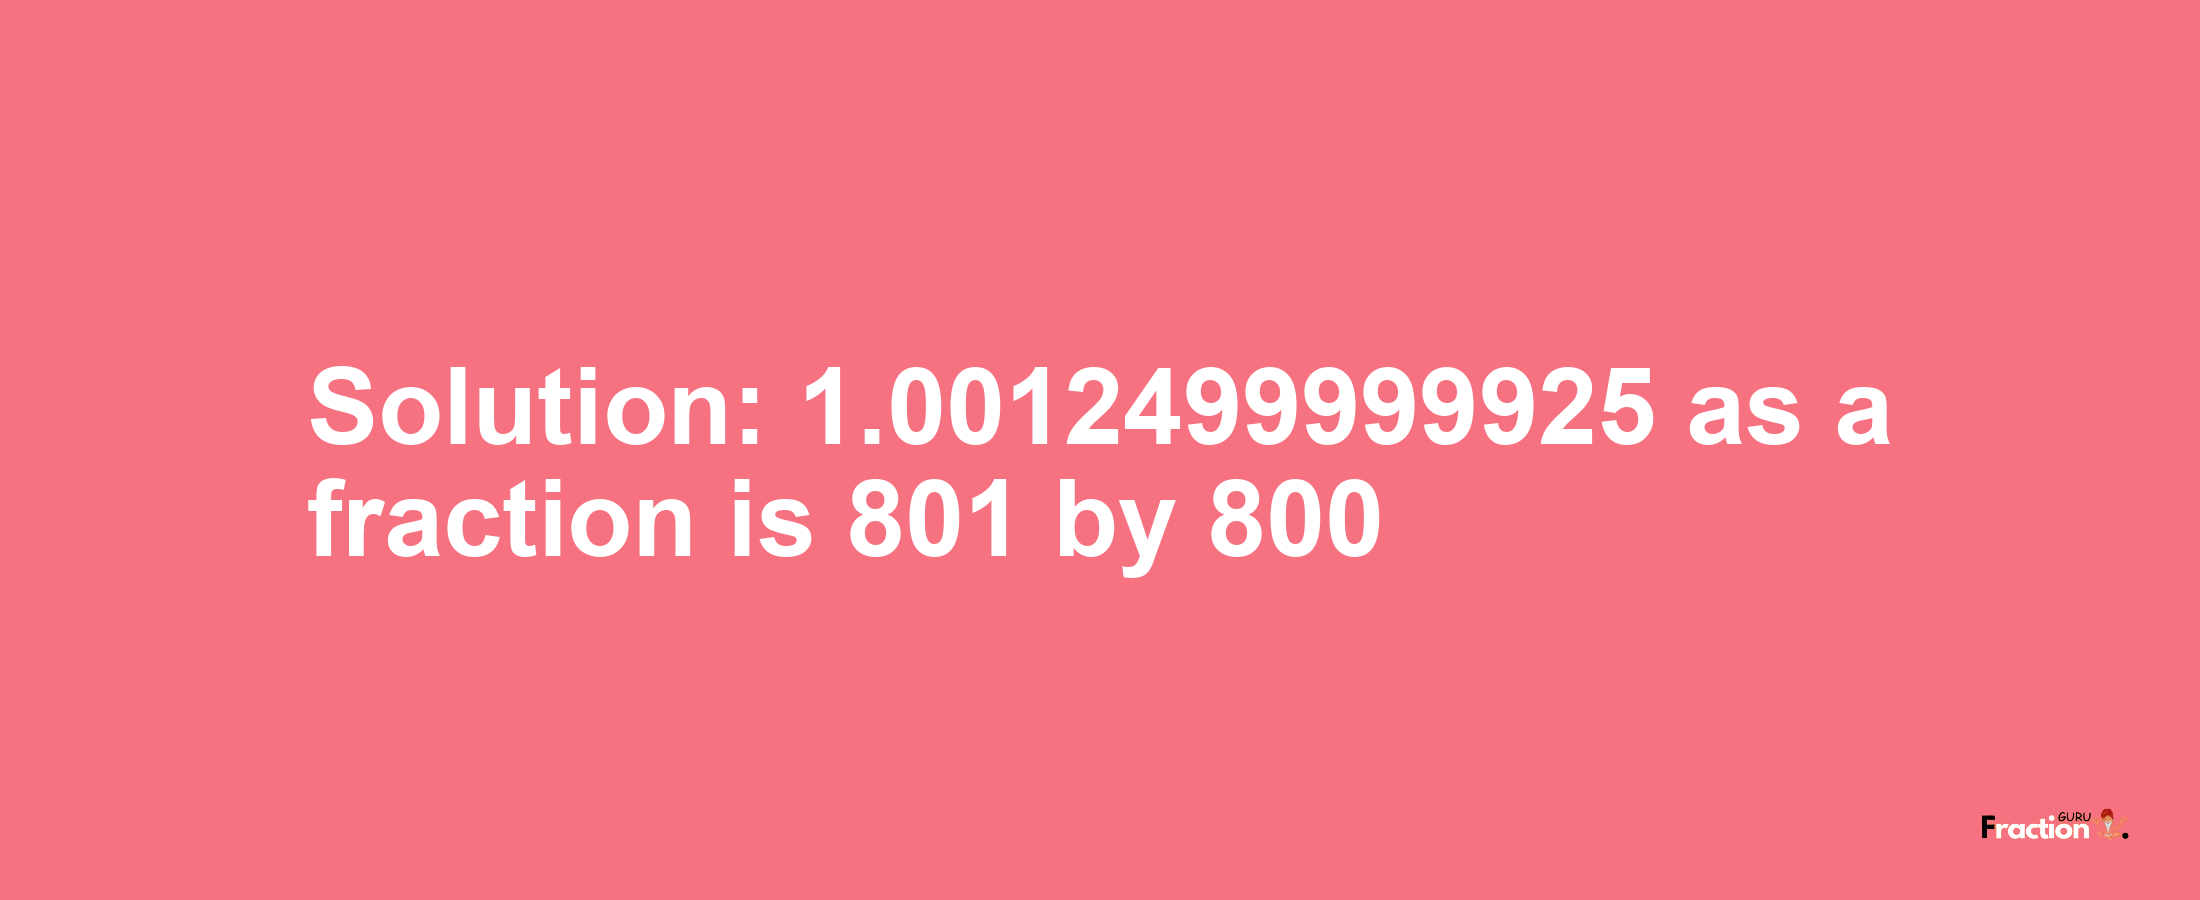 Solution:1.0012499999925 as a fraction is 801/800